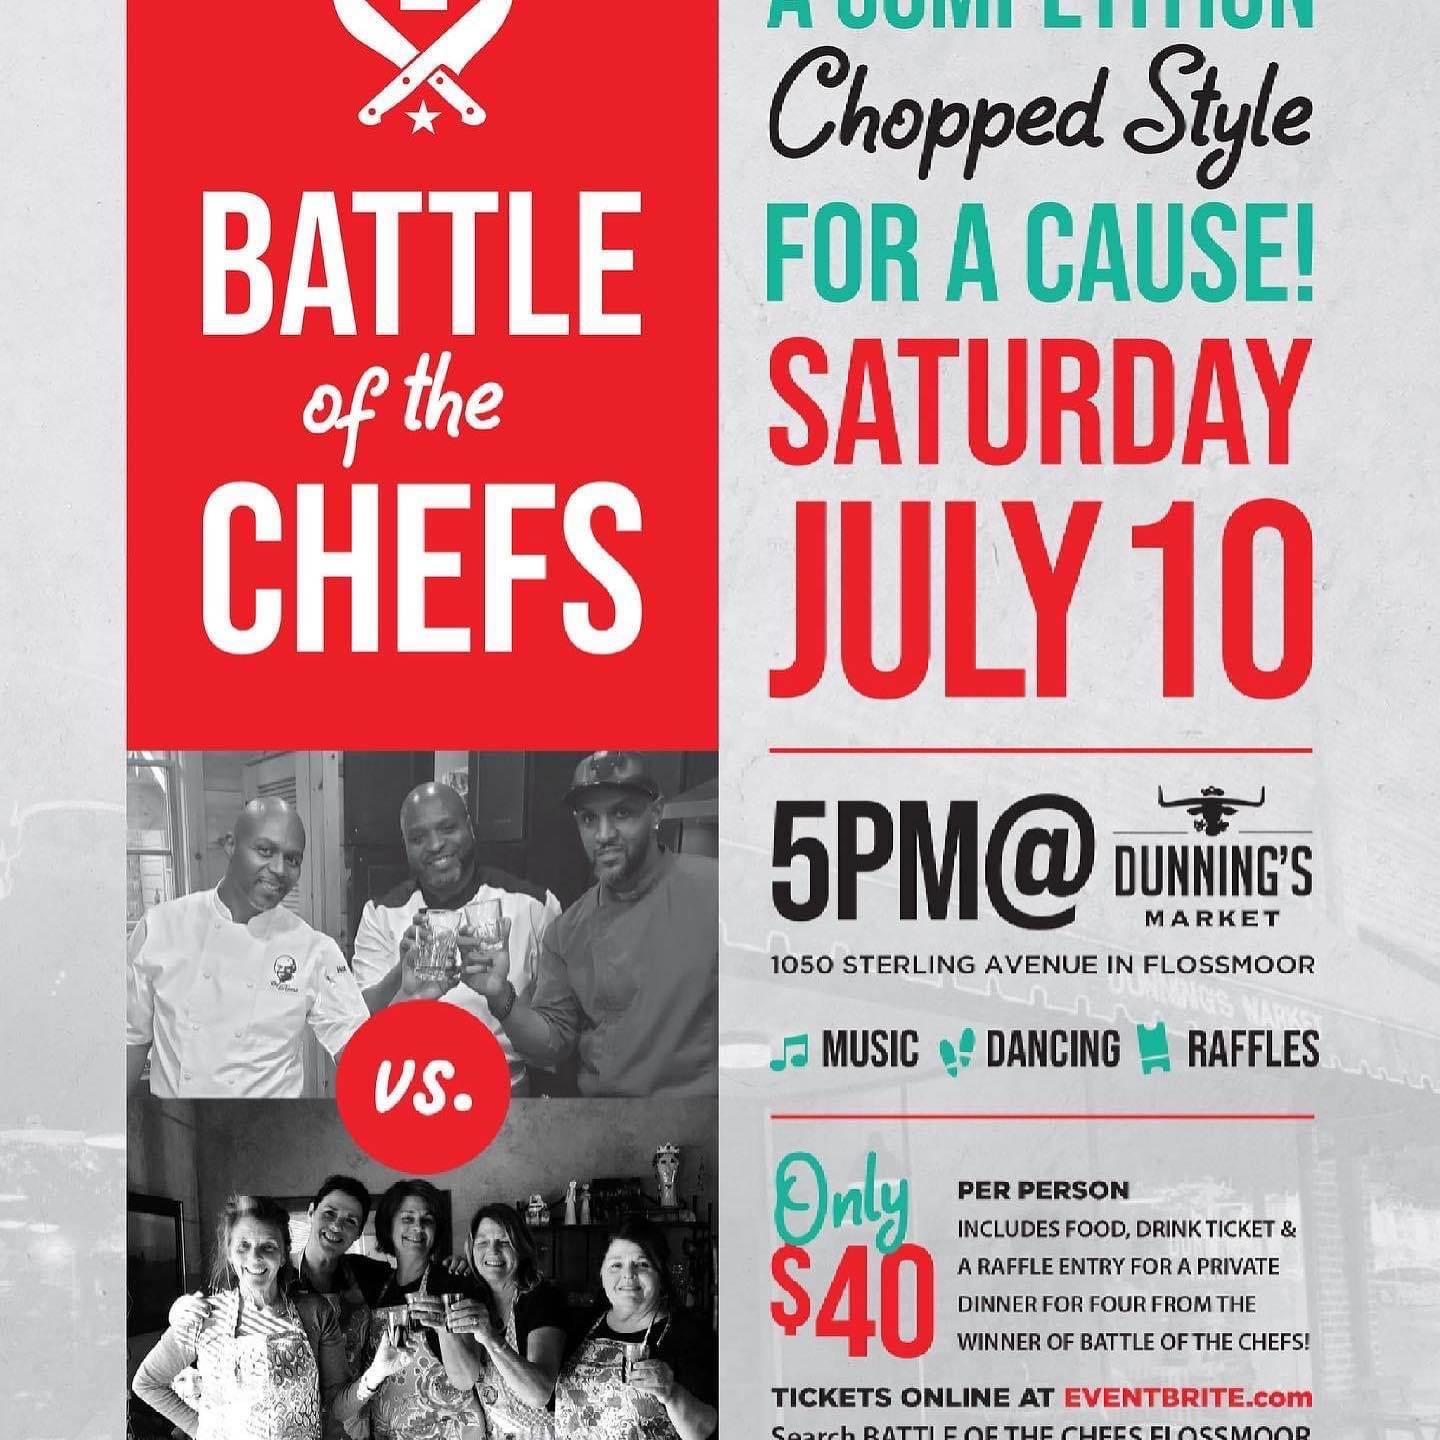 mn yviril 111 1ViY

Chopped Style

NAIL: FOR A CAUSE!
2 ZI SATURDAY

JULY10

1050 STERLING AVENUE IN FLOSSMOOR